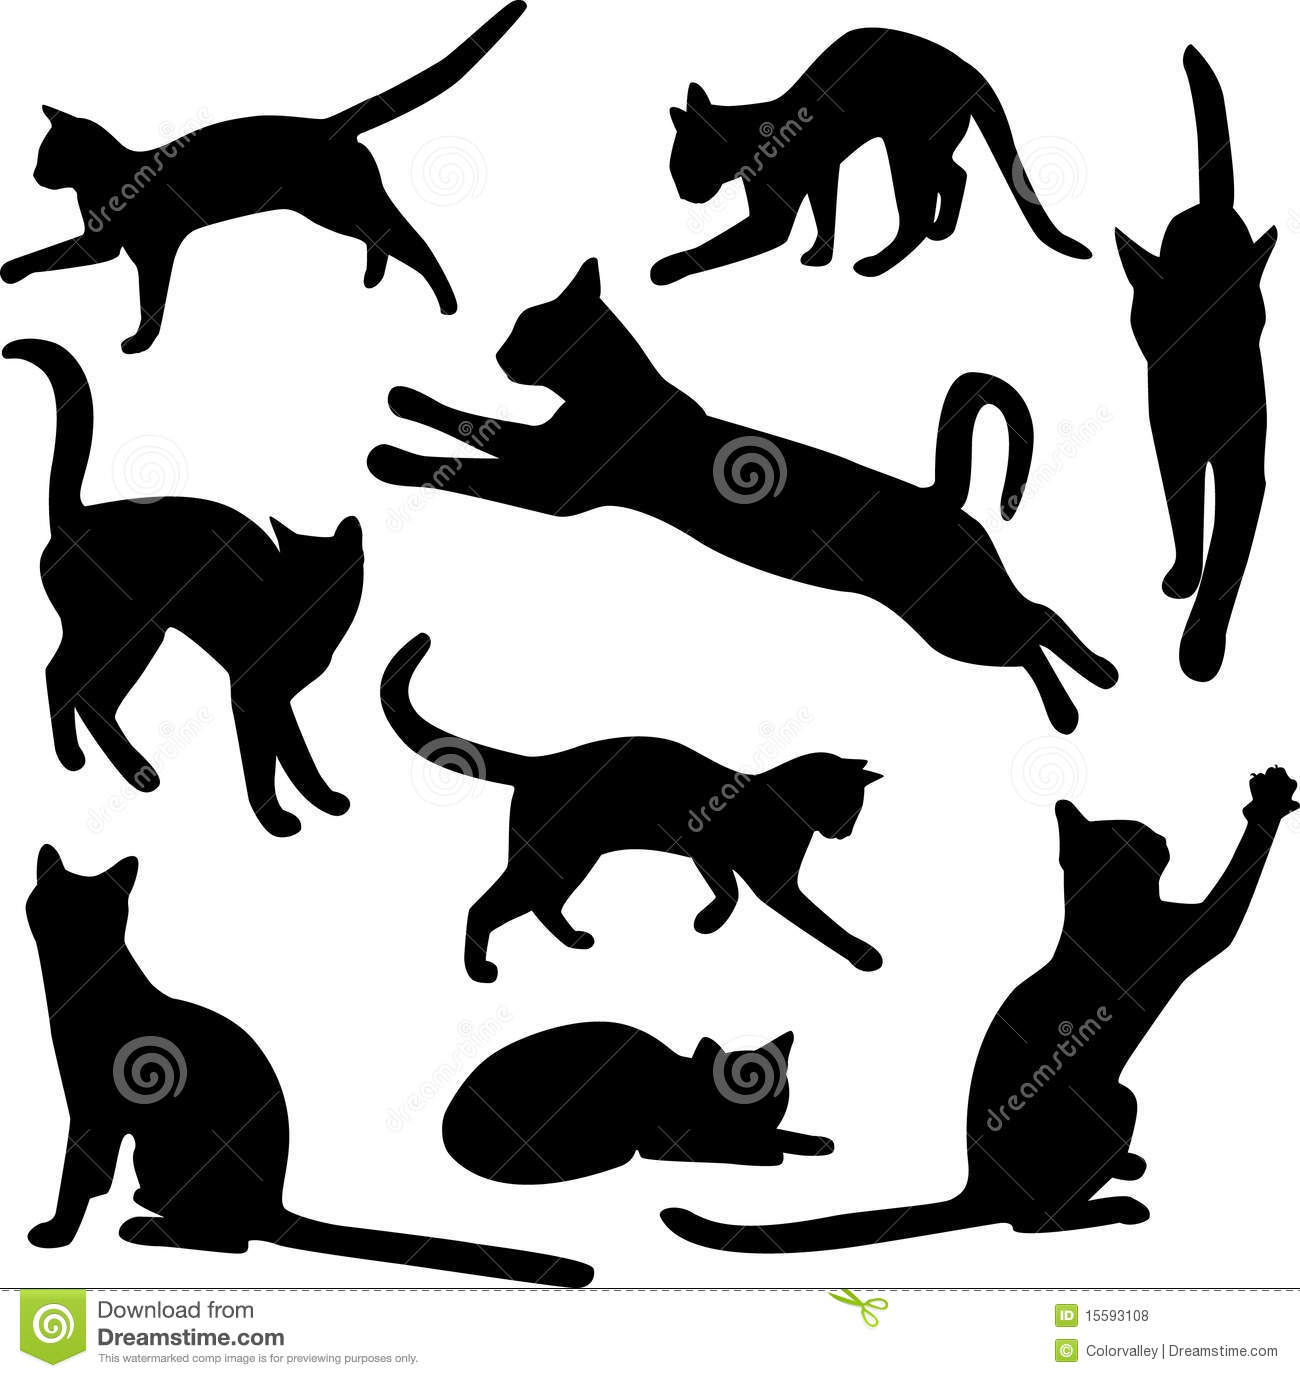 Vector Collection Of Cat Silhouettes Royalty Free Stock Photos   Image